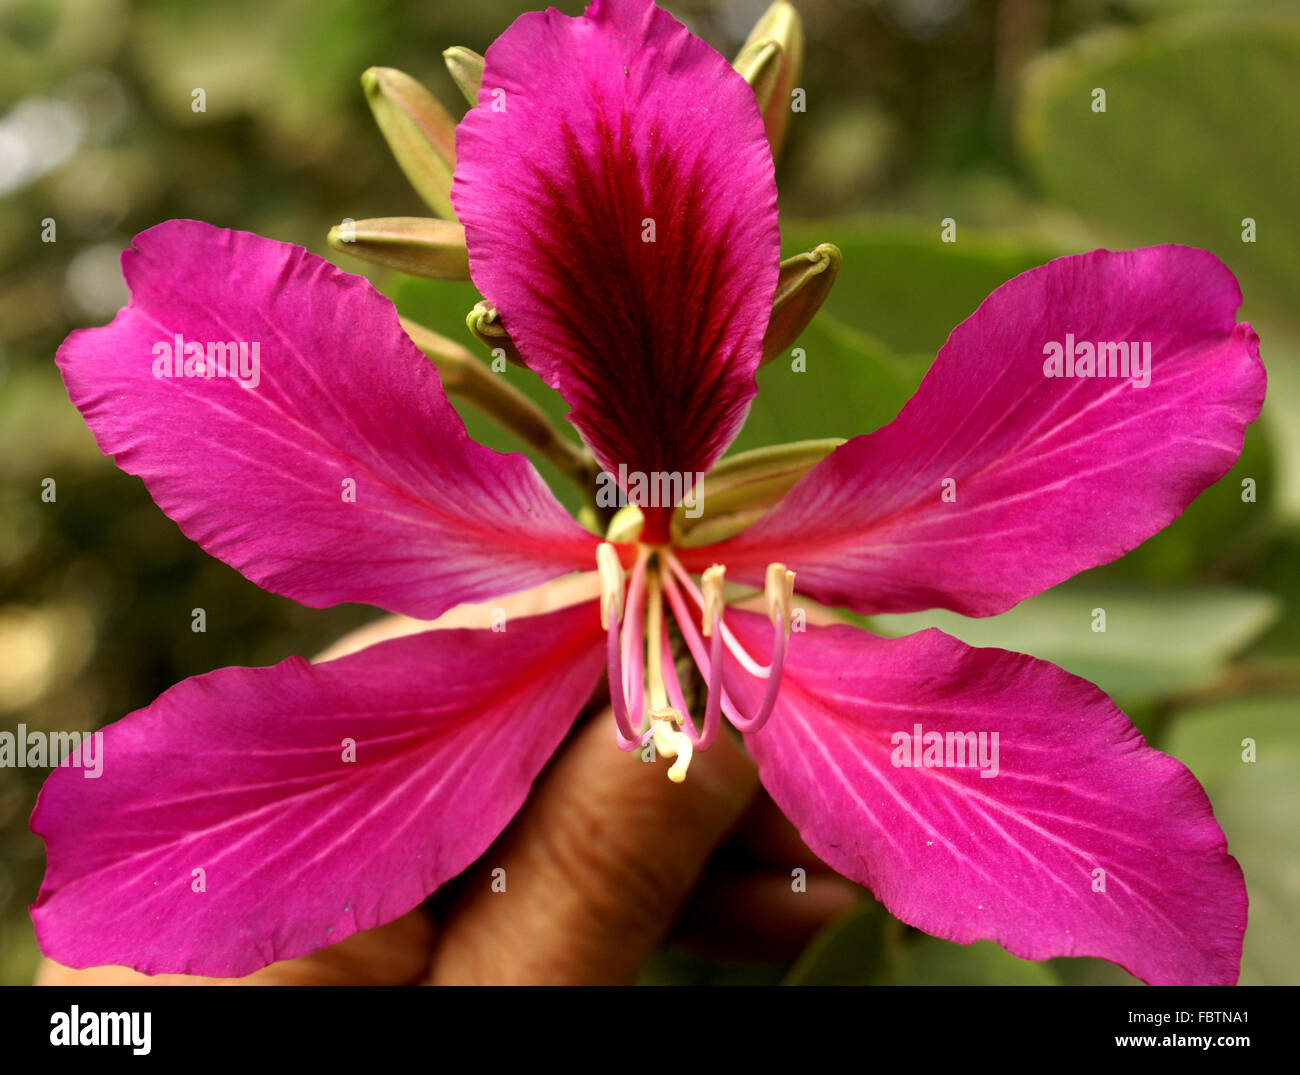 Bauhinia x blakeana, Hong Kong Orchid tree, sterile hybrid with purple red fragrant orchid-like flowers Stock Photo